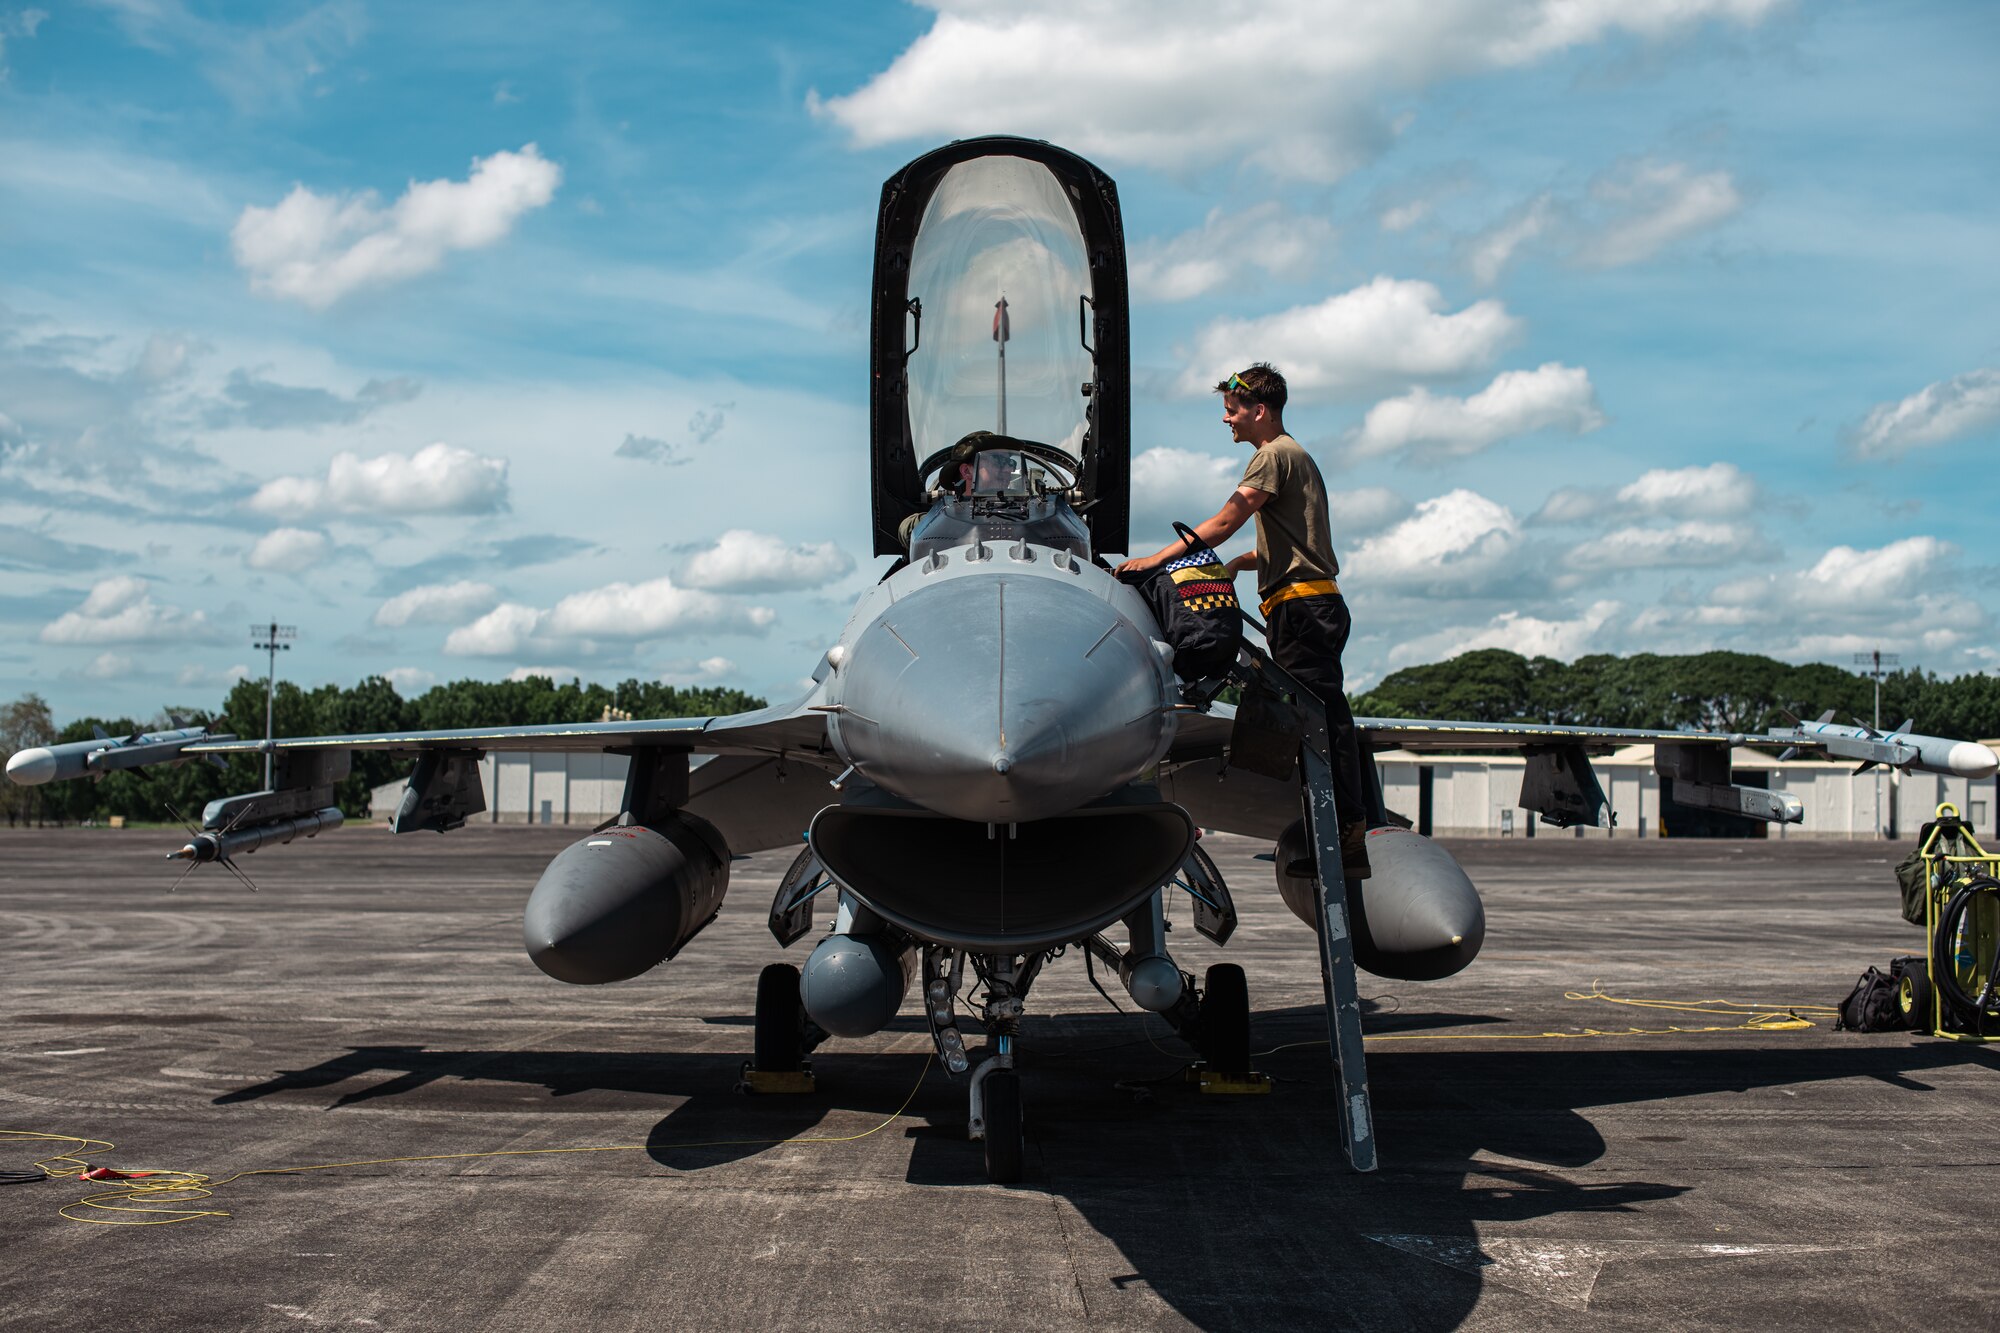 A 14th Fighter Squadron pilot and a crew chief assigned to the 14th Aircraft Maintenance Unit conduct preflight checks on a F-16 Fighting Falcon